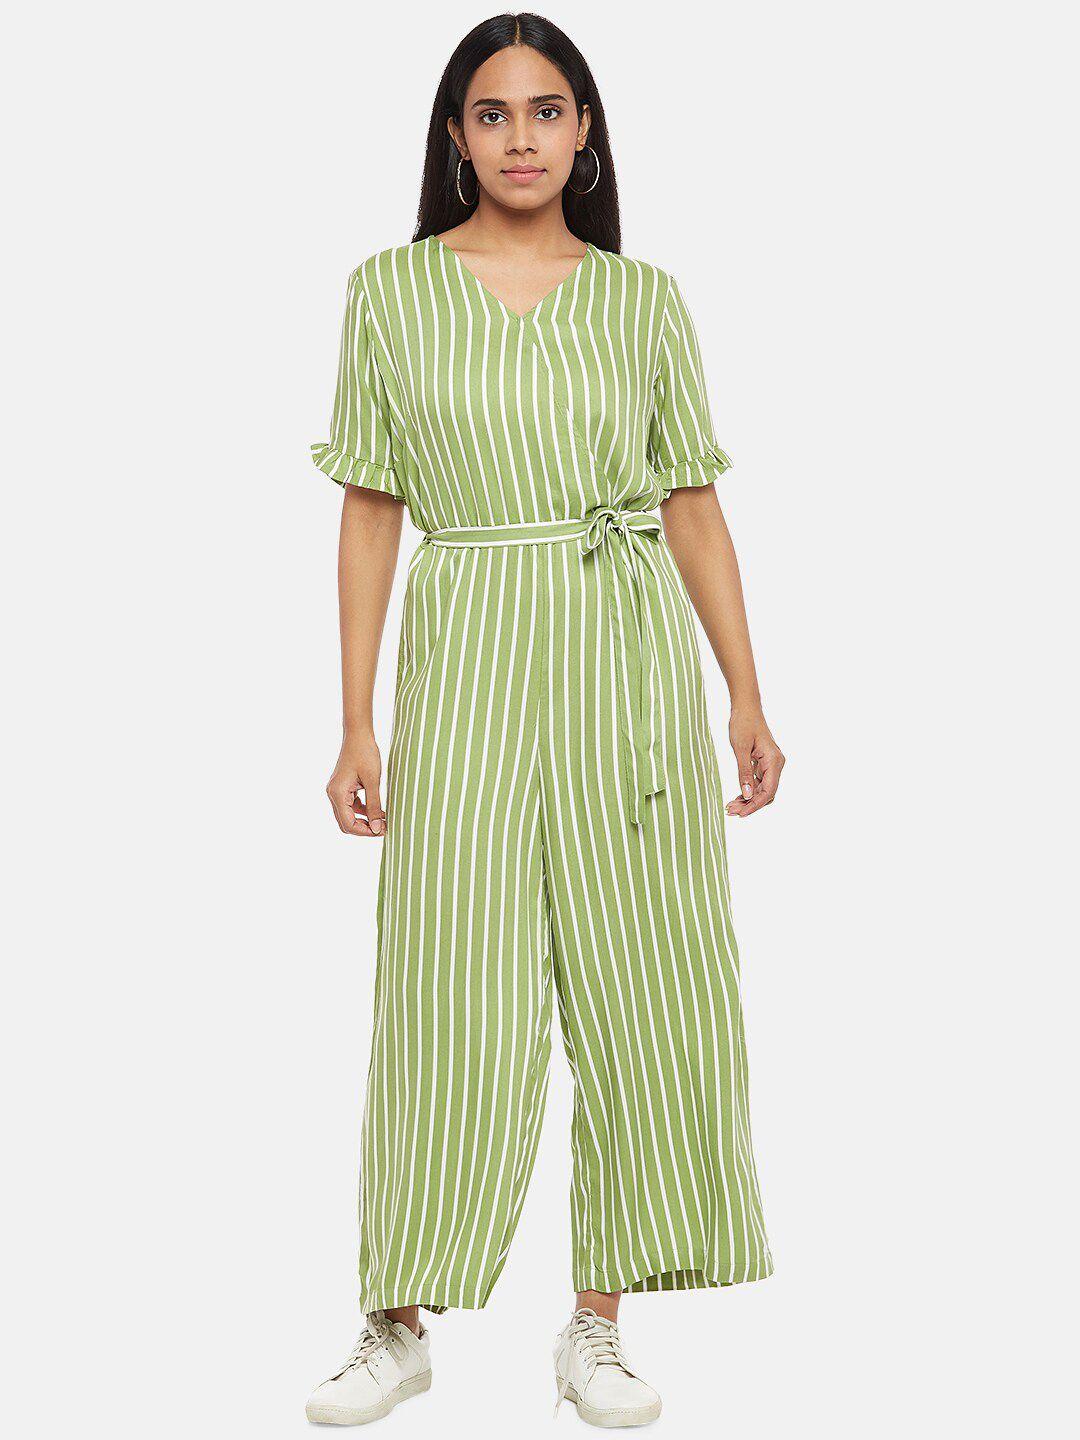 honey by pantaloons green & white striped basic jumpsuit